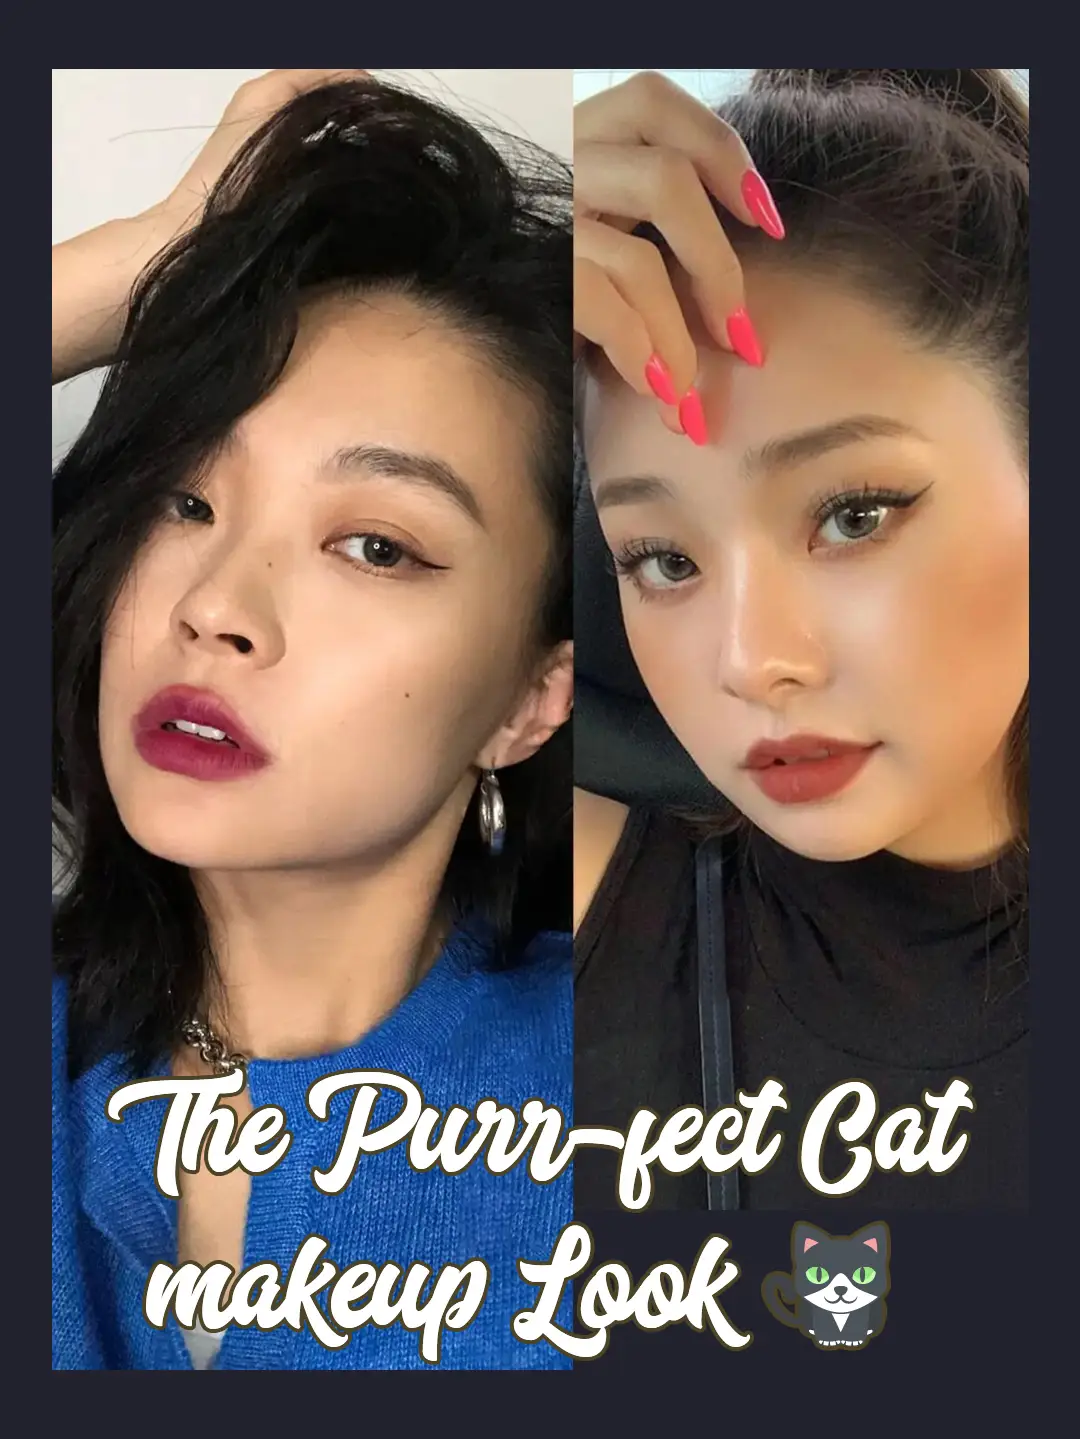 A PURR-FECT MAKEUP LOOK FOR HALLOWEEN (VIDEO INCLUDED) 